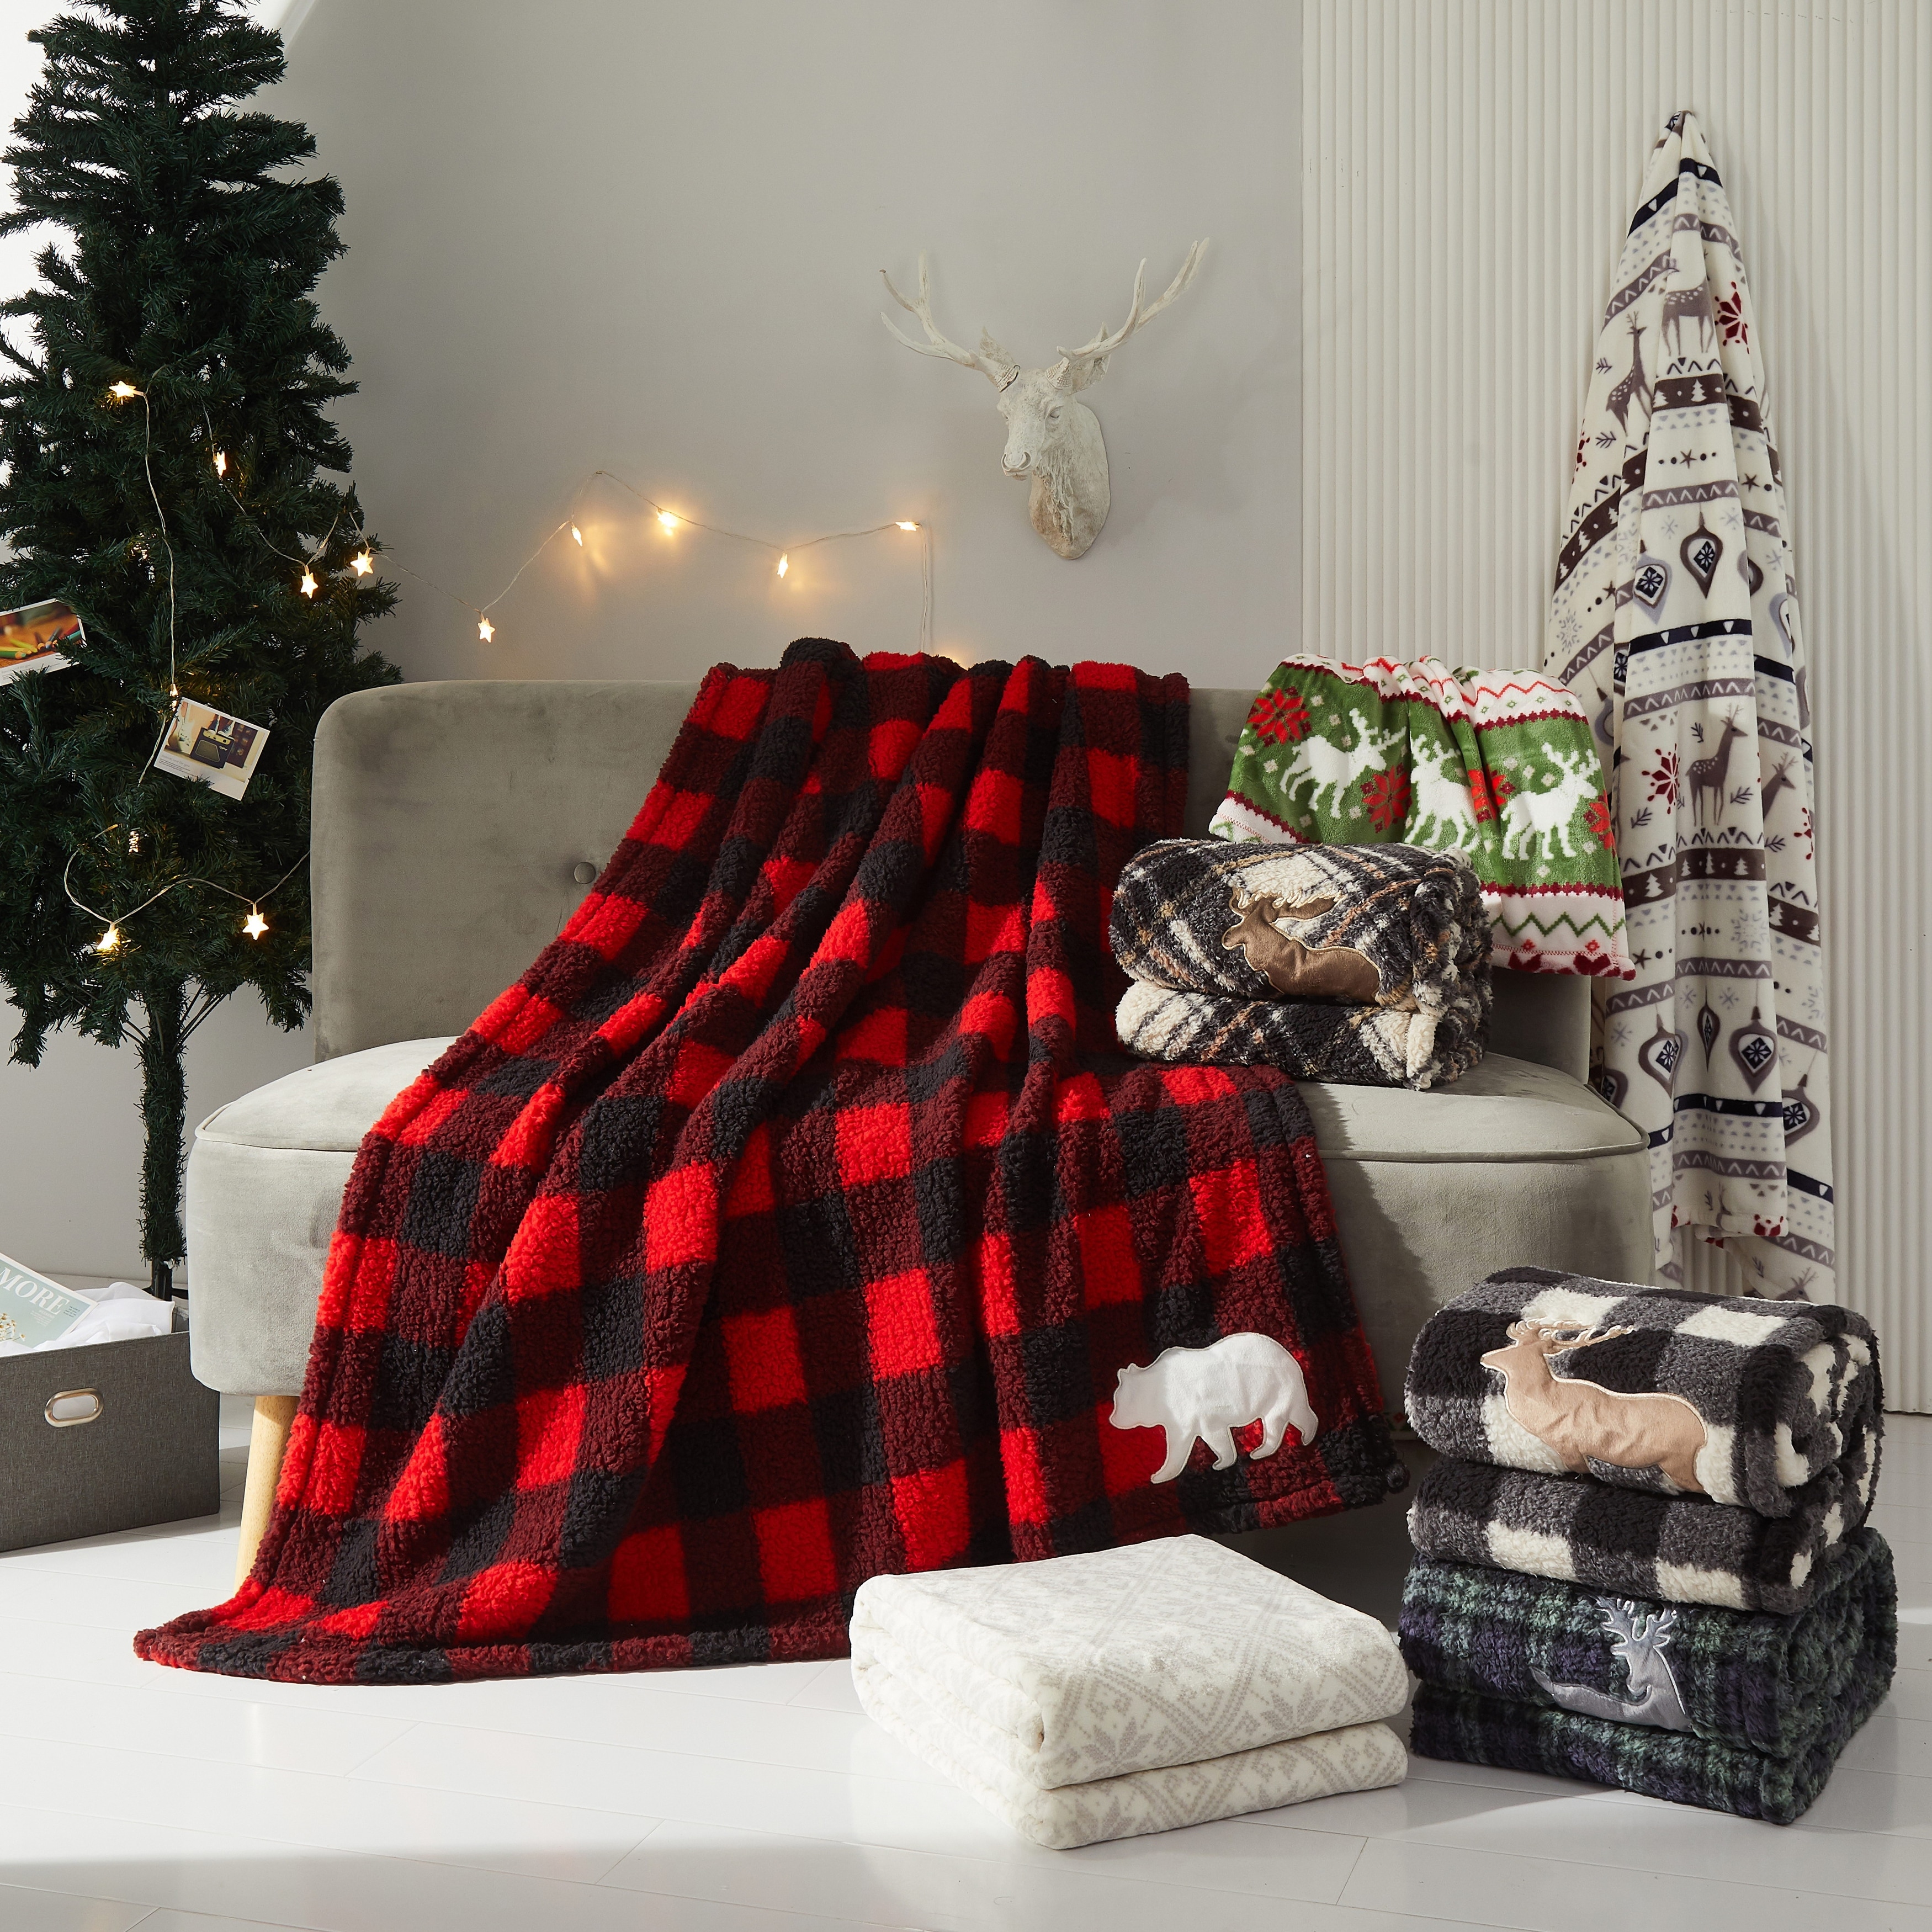  Eddie Bauer - Throw Blanket, Reversible Sherpa Fleece Bedding, Buffalo  Plaid Home Decor for All Seasons (Red Check, Throw) : Home & Kitchen